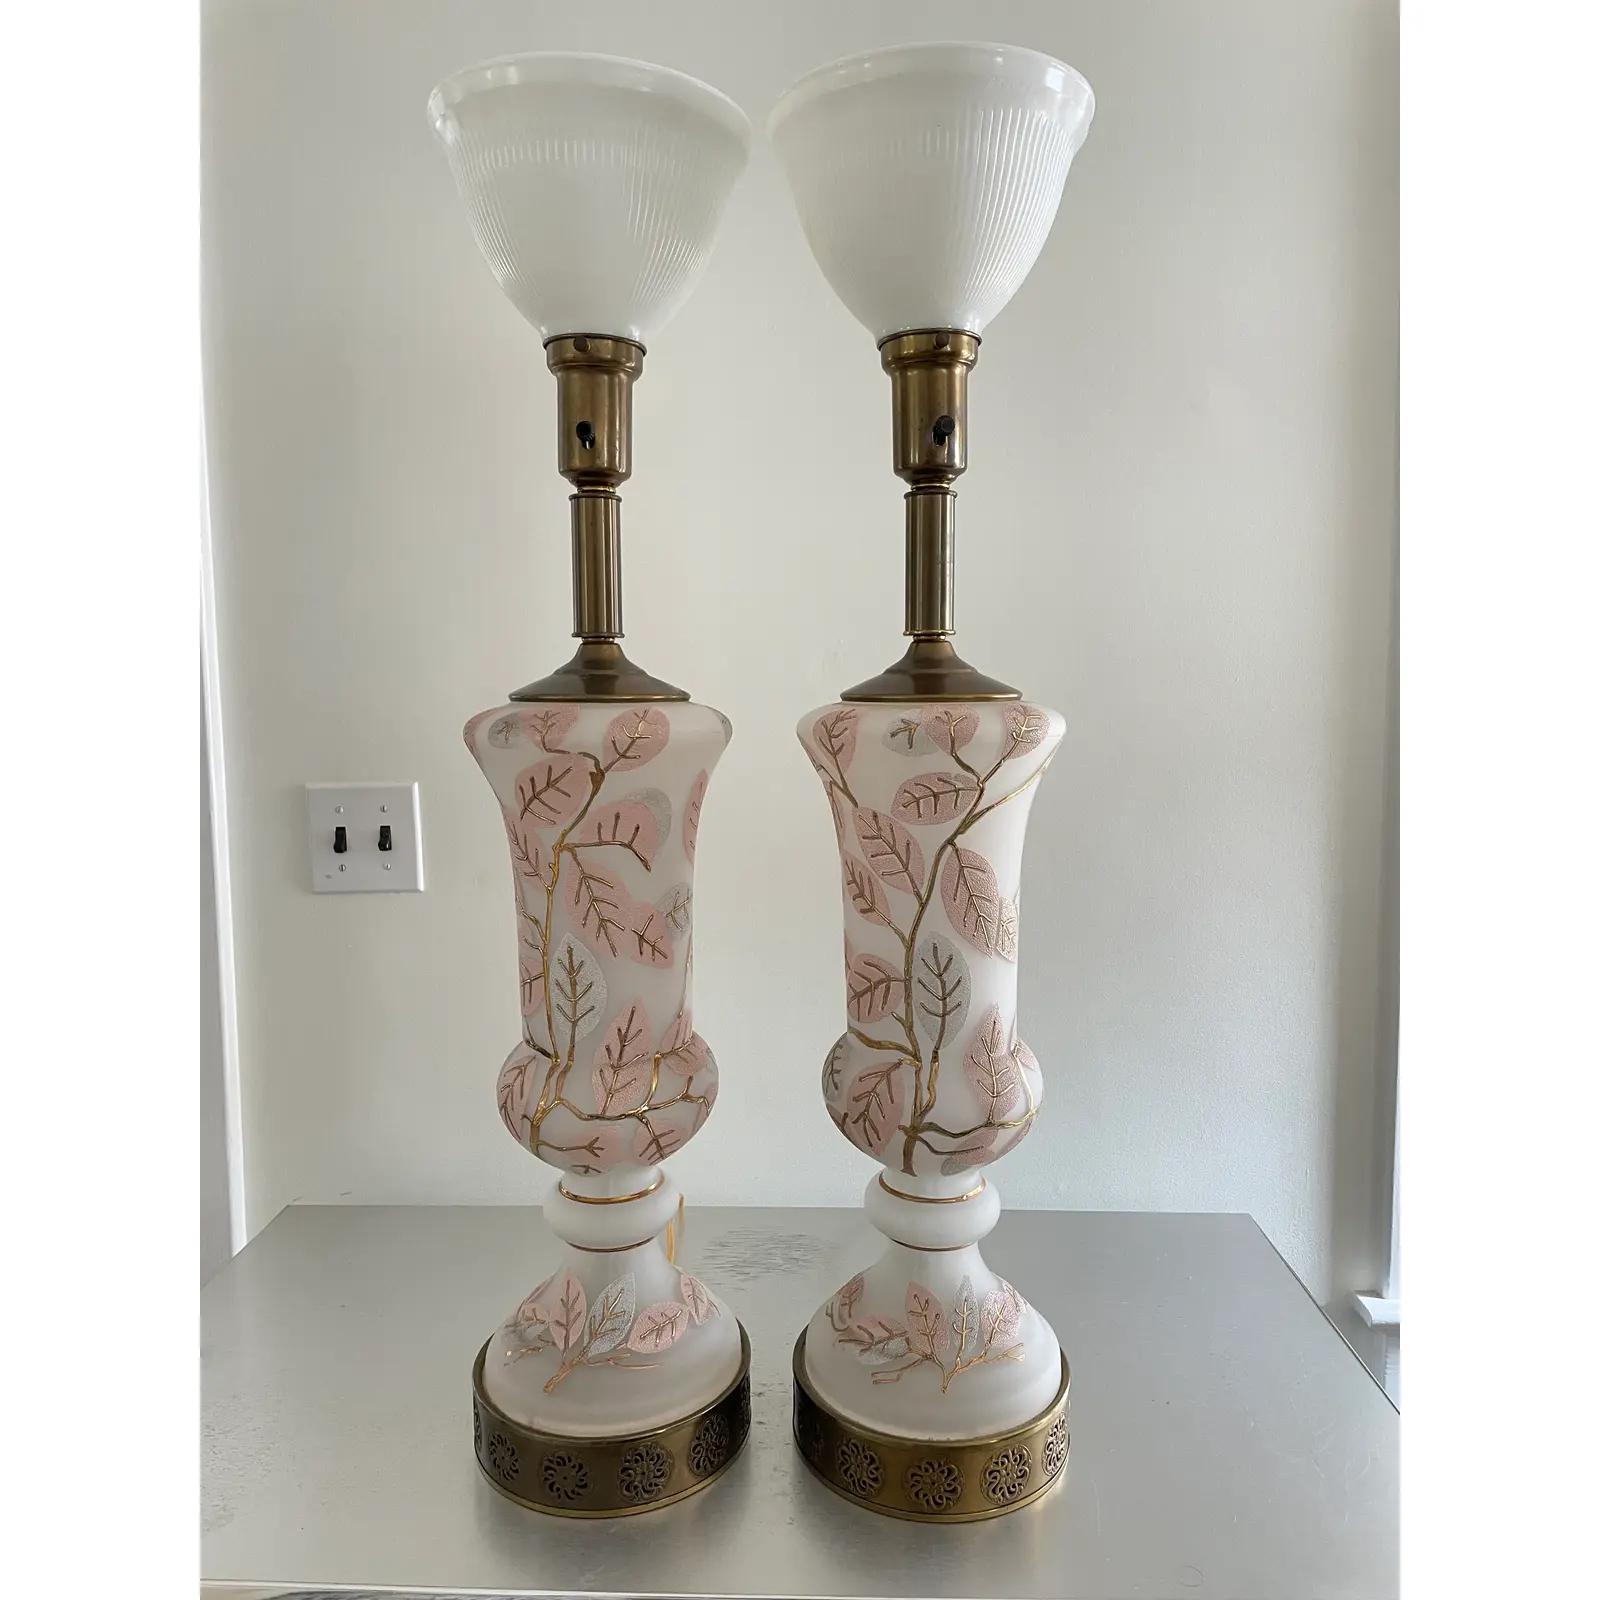 20th Century  Hollywood Regency Urn Lamps - a Pair For Sale